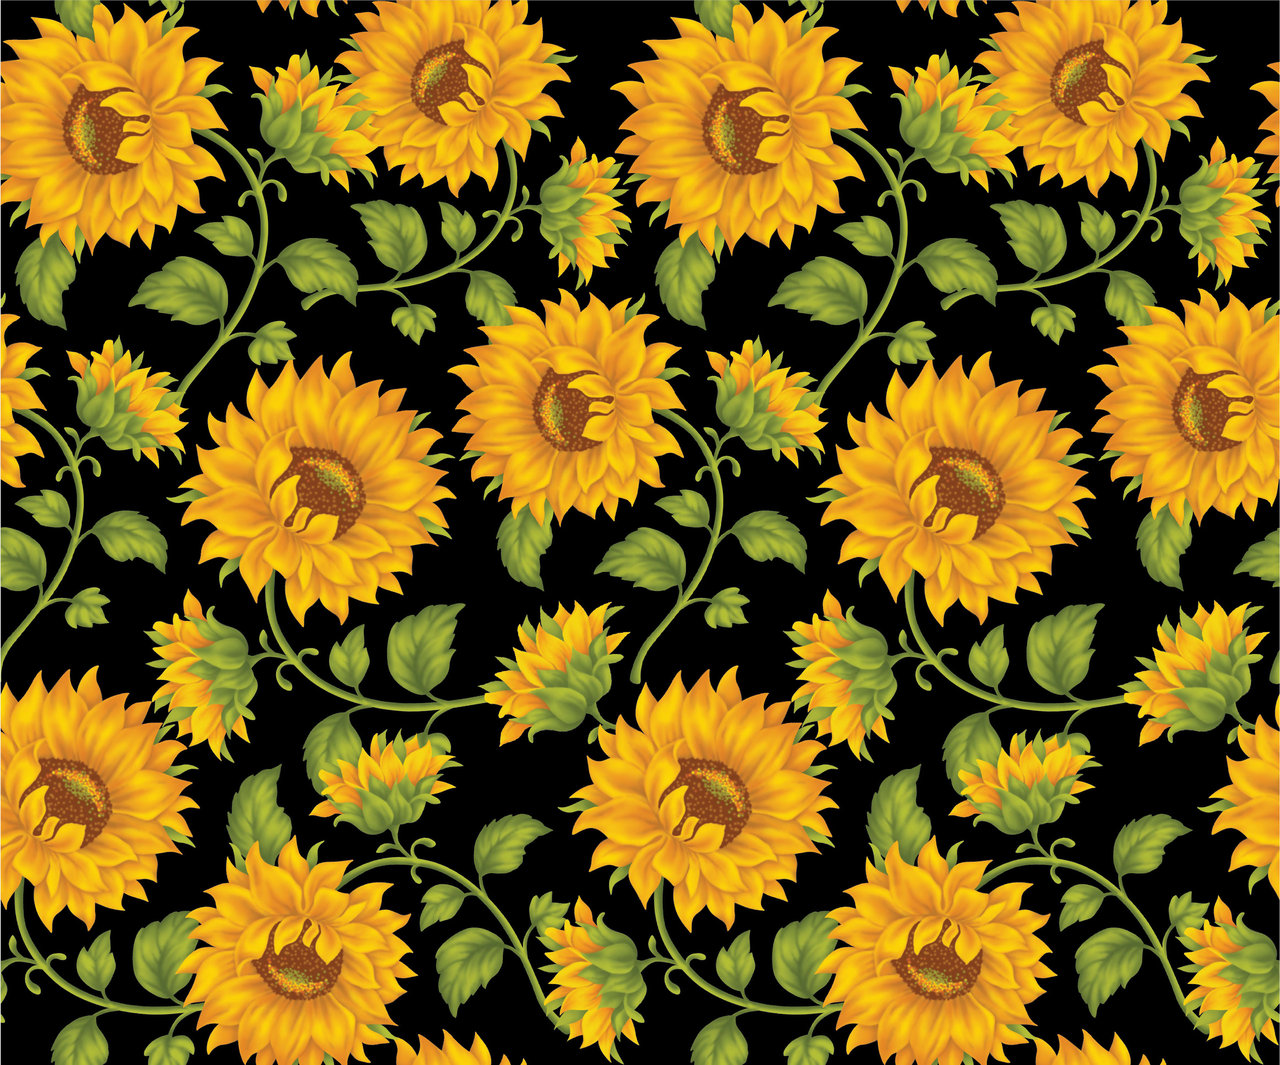 Sunflower Print In Black Background By Doncabanza